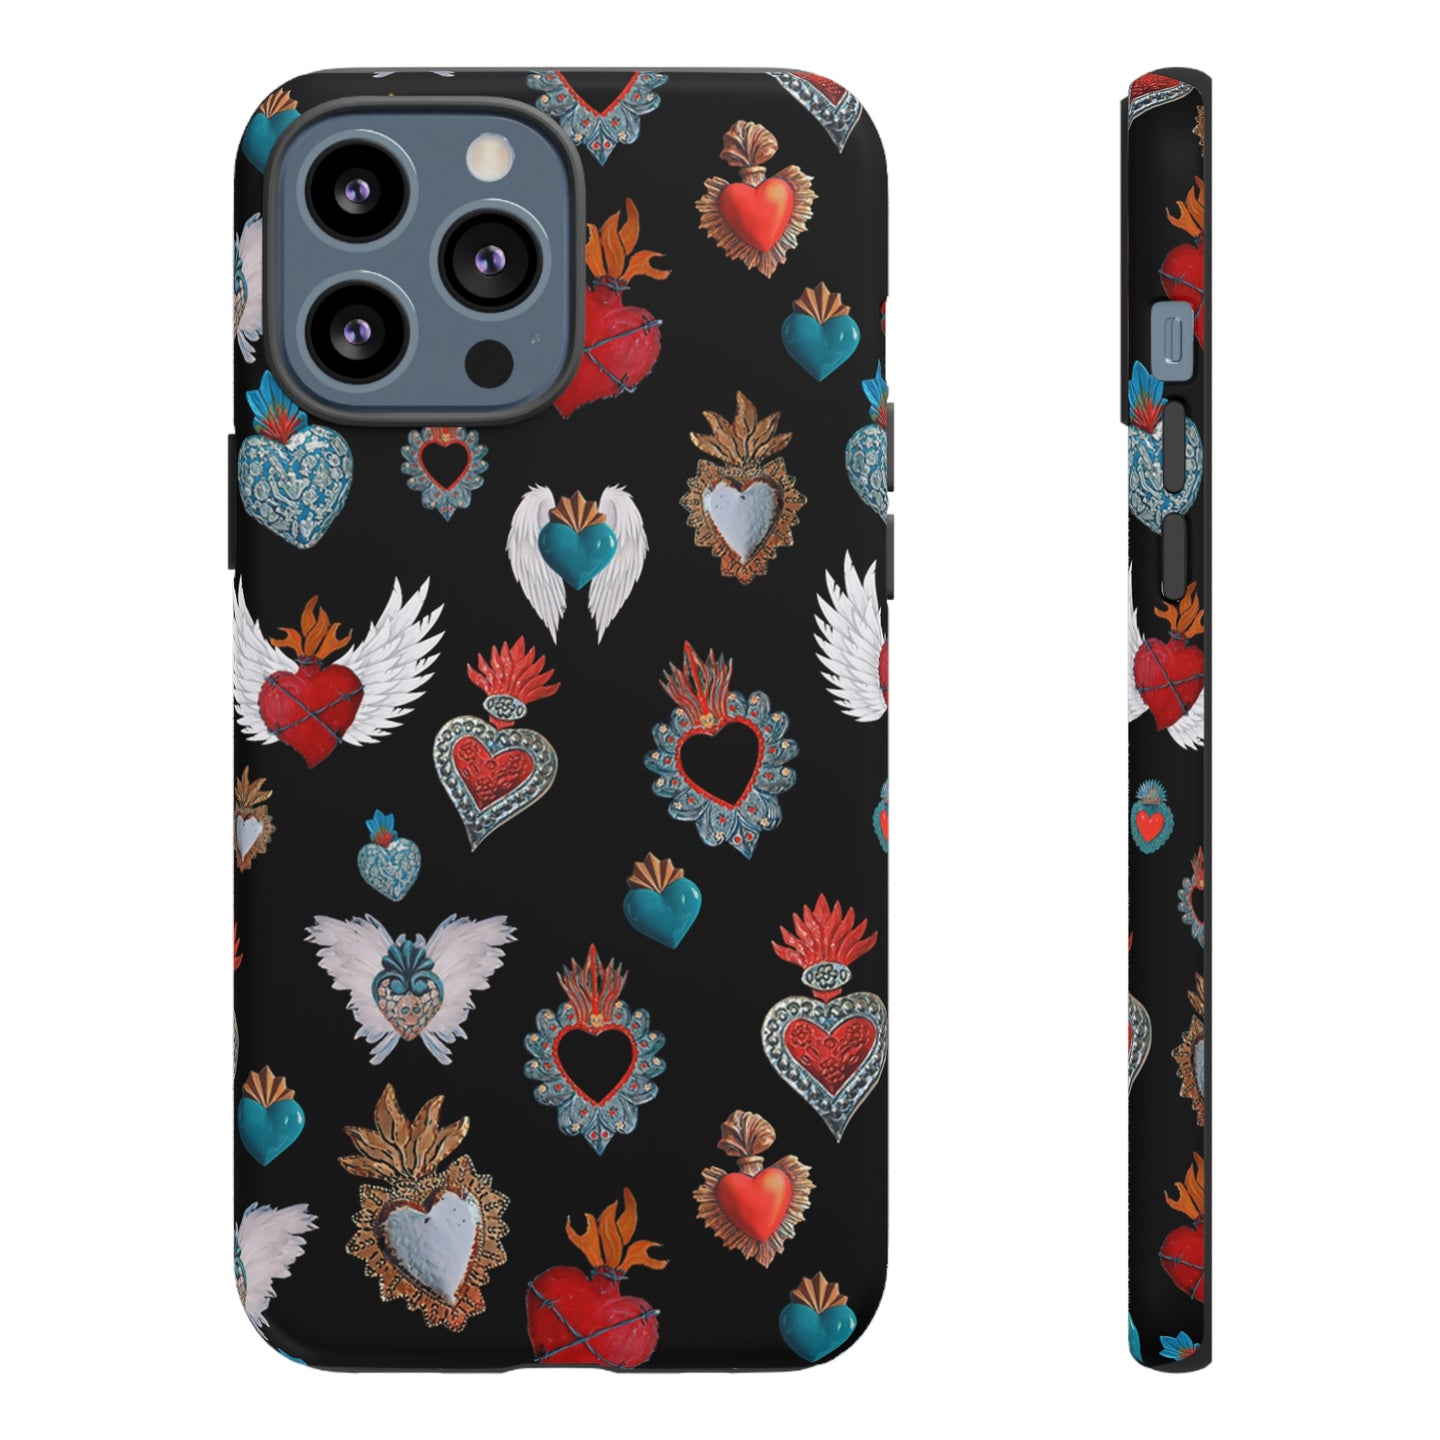 San Miguel My Heart Tough Phone Cases